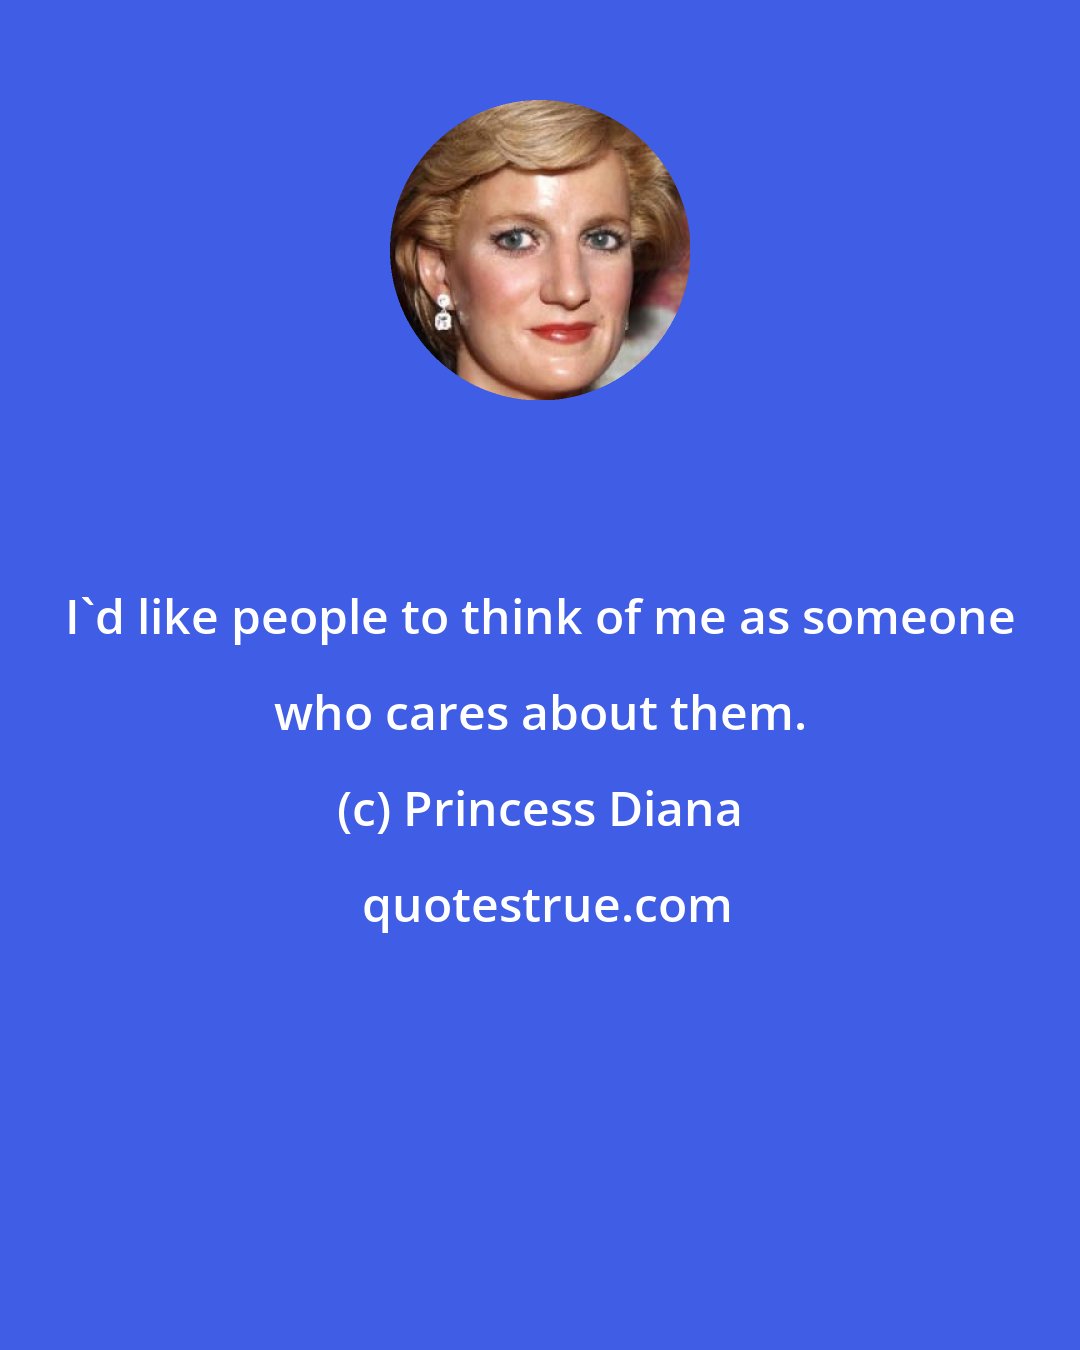 Princess Diana: I'd like people to think of me as someone who cares about them.